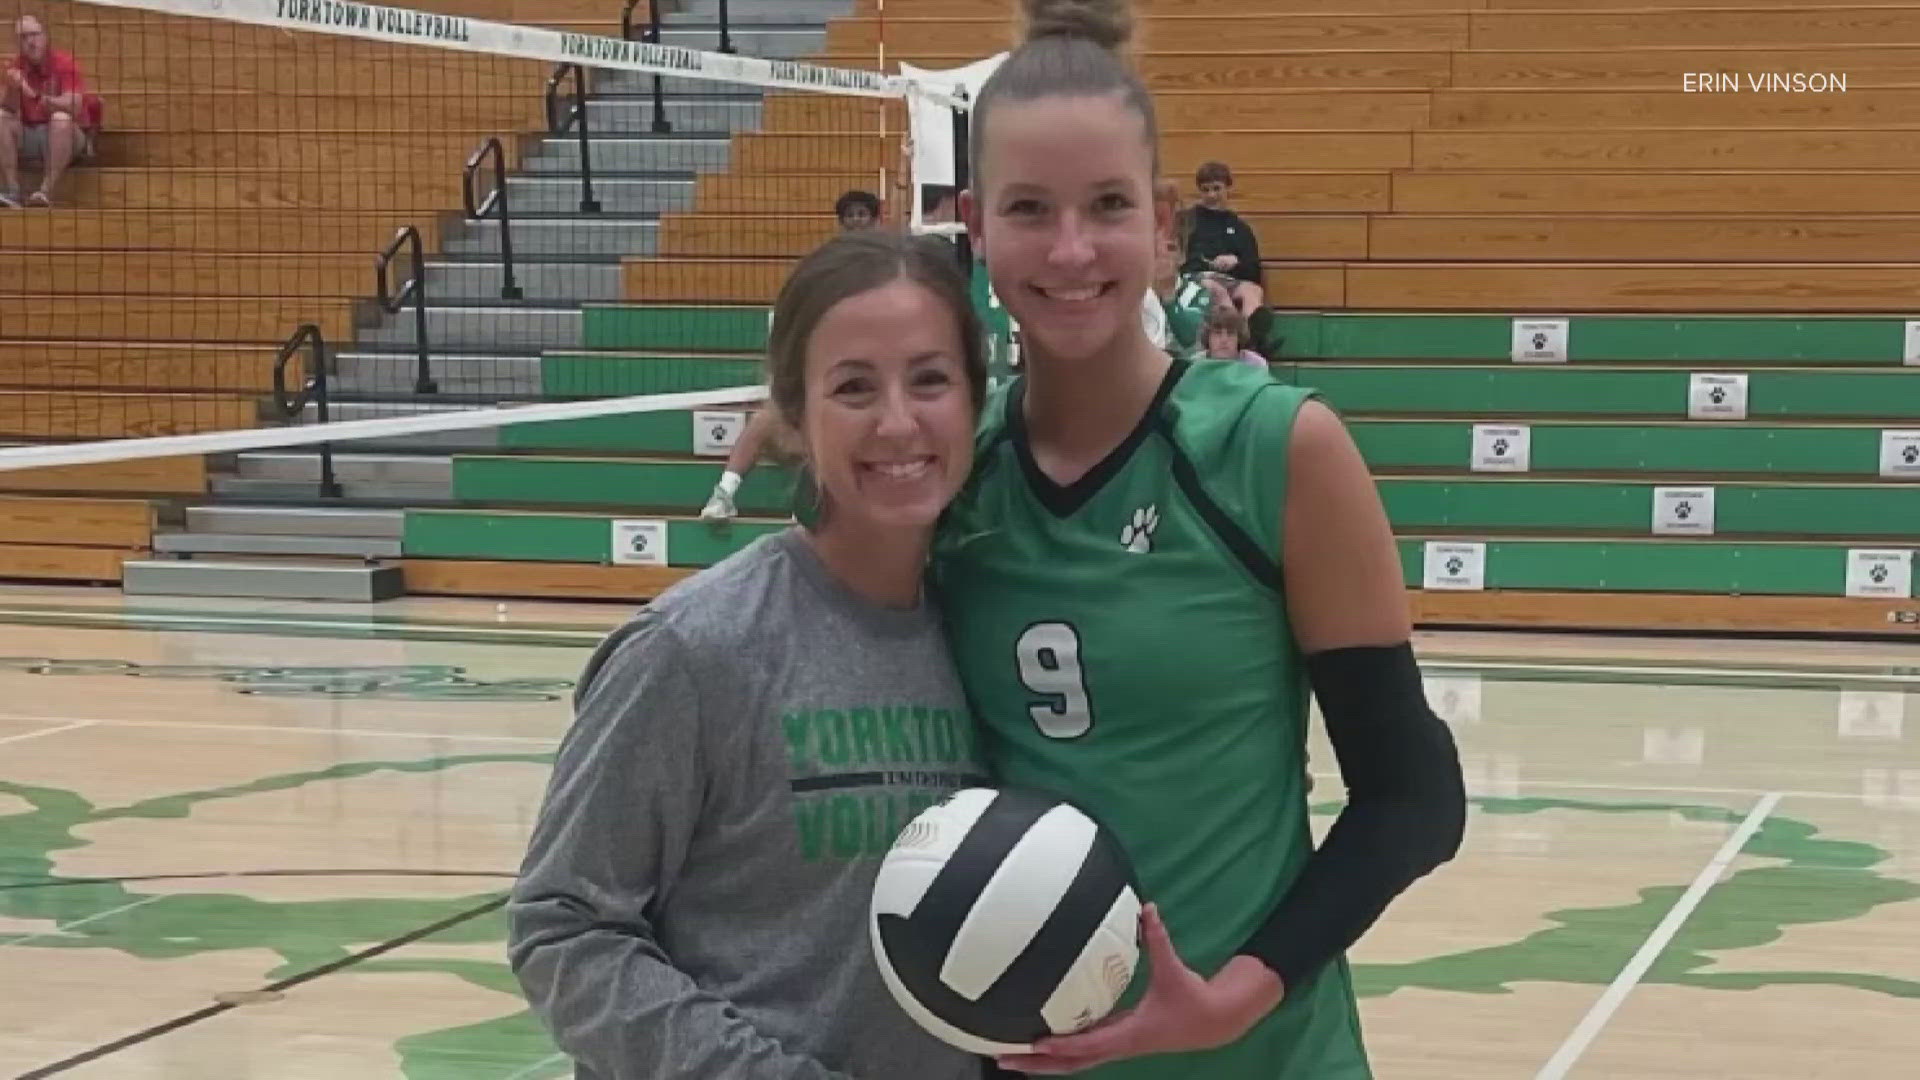 Charlotte Vinson is a star on the volleyball court, but she survived a serious illness.